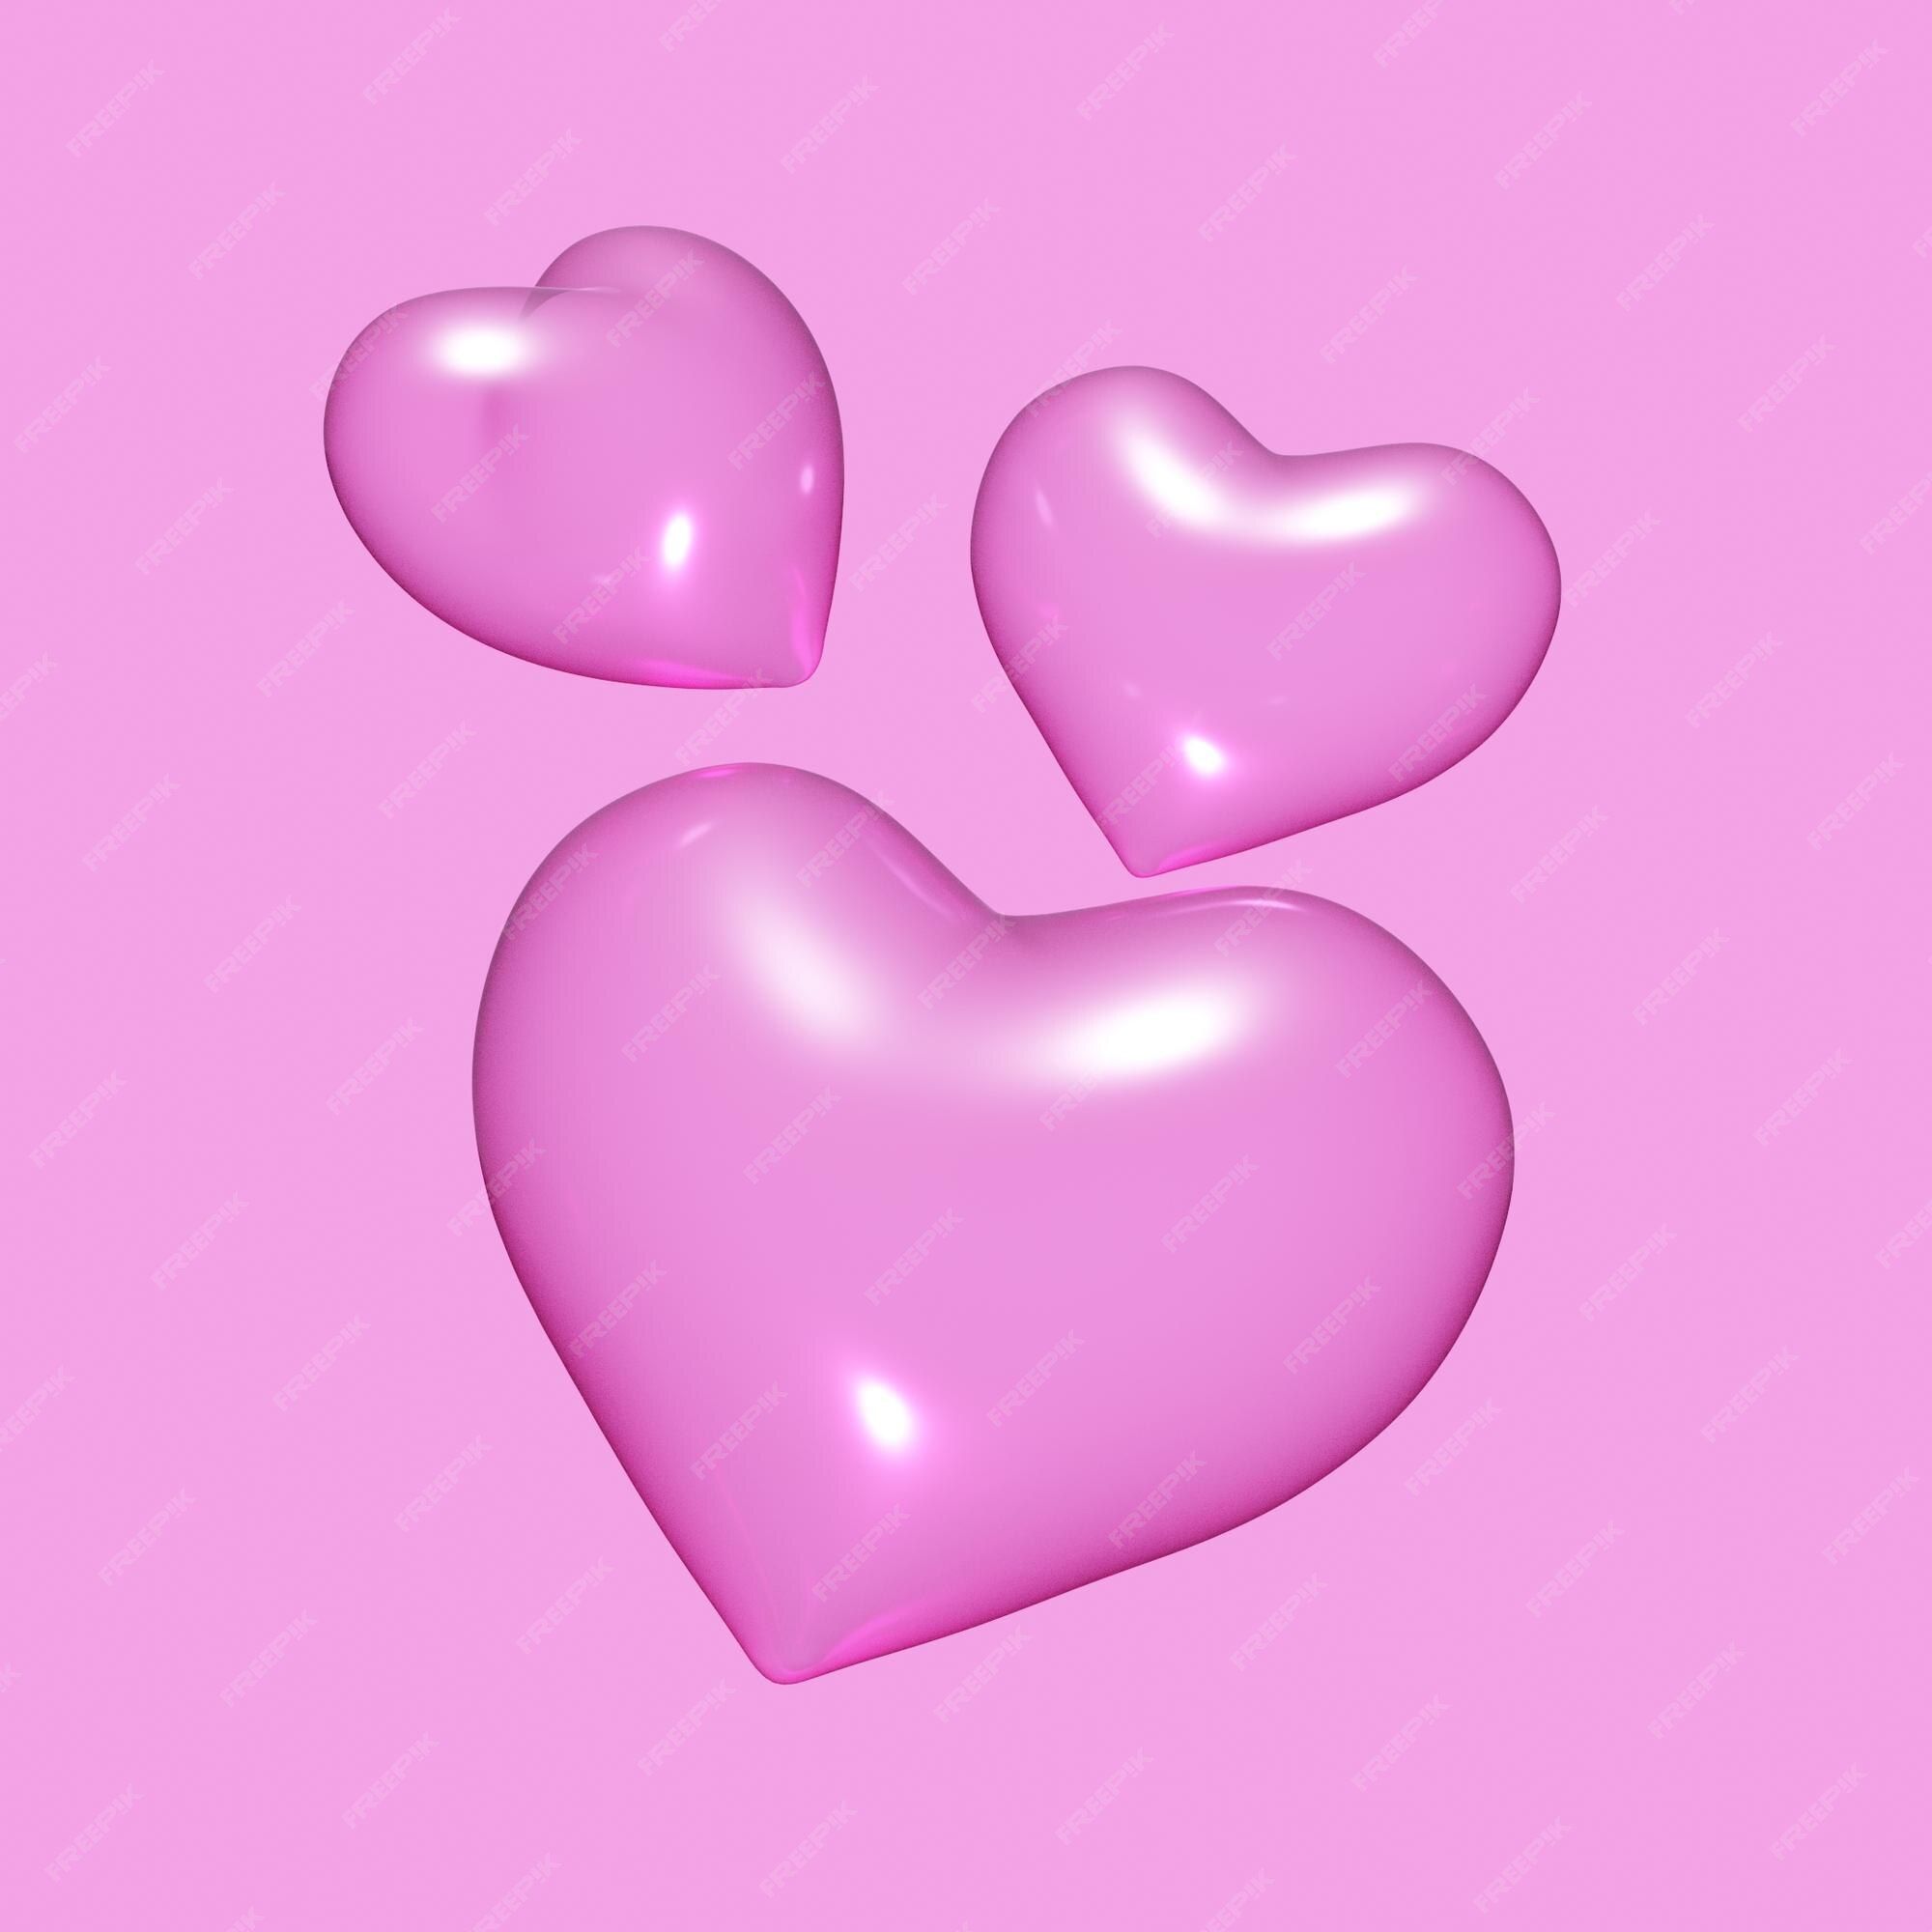 Premium Photod render pink background with three hearts on it and the word love on it